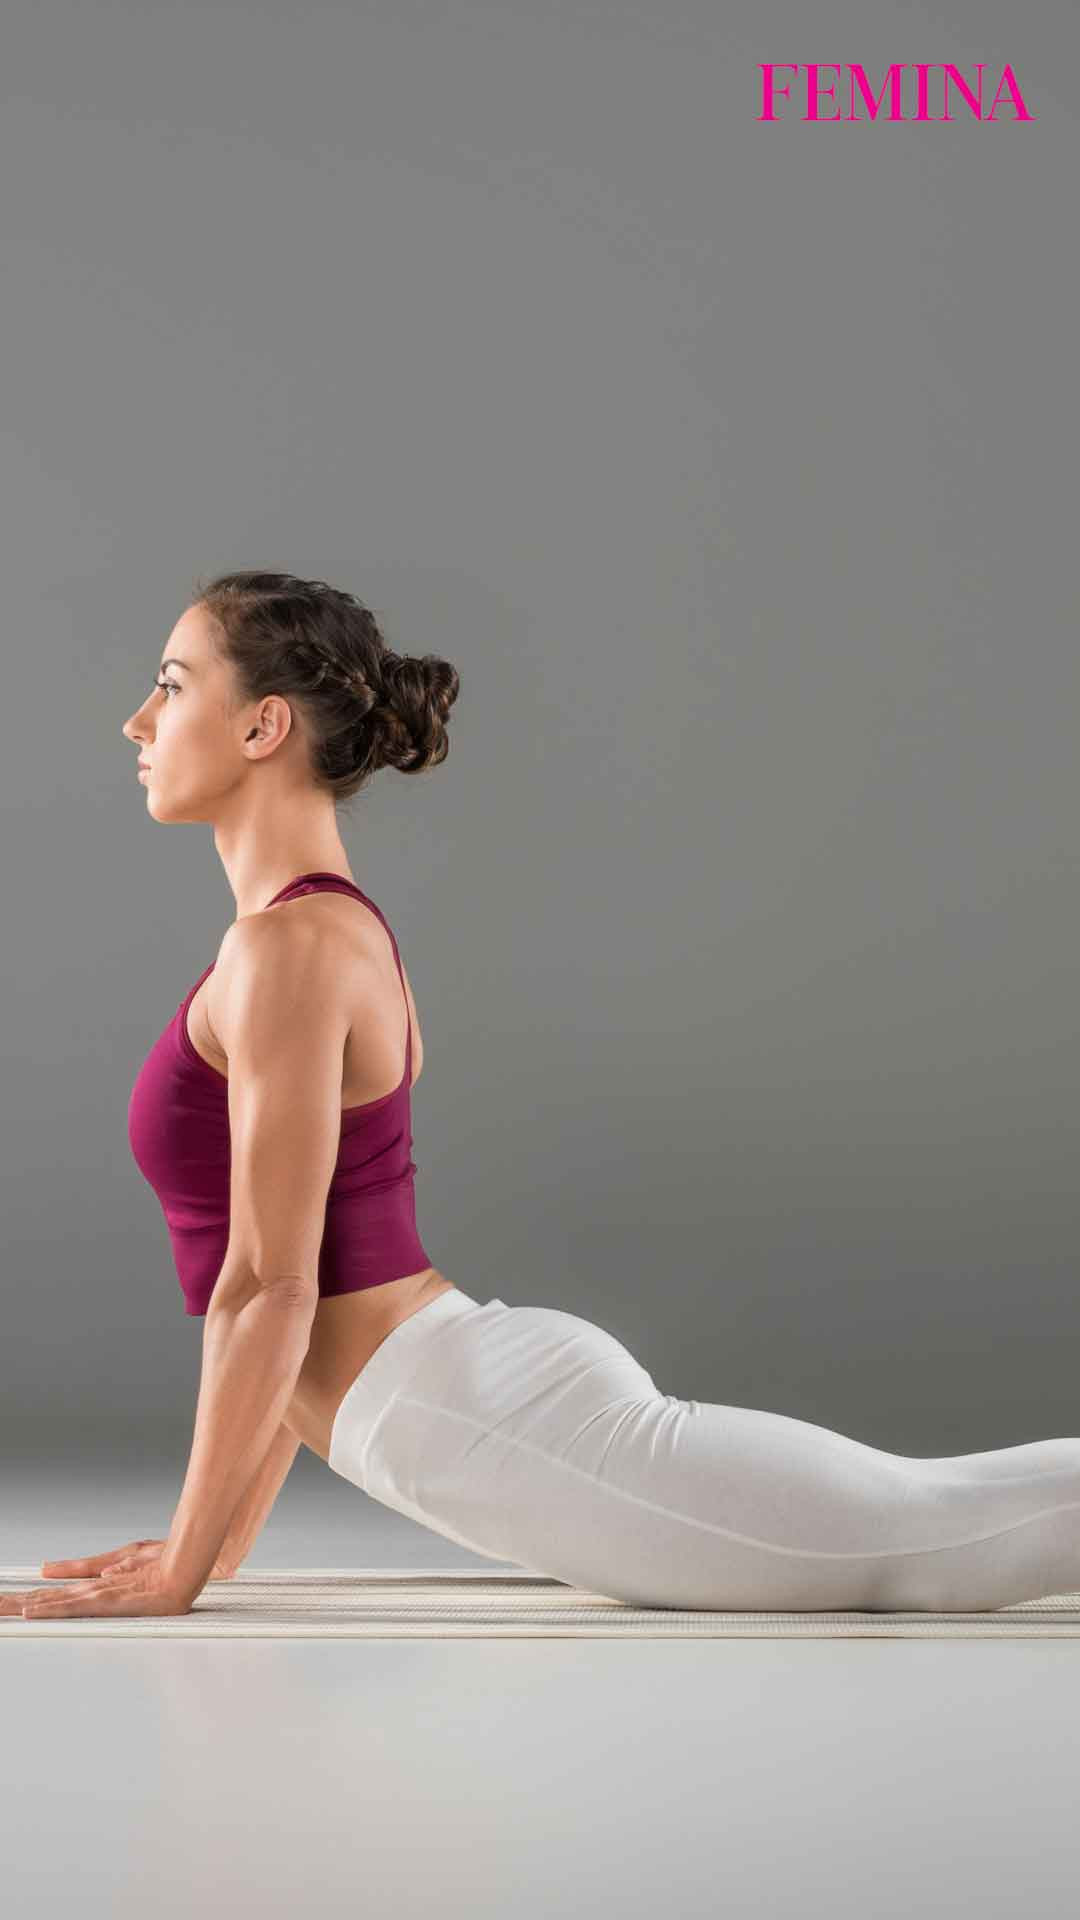 Effective Yoga Poses For PCOS- HealthifyMe